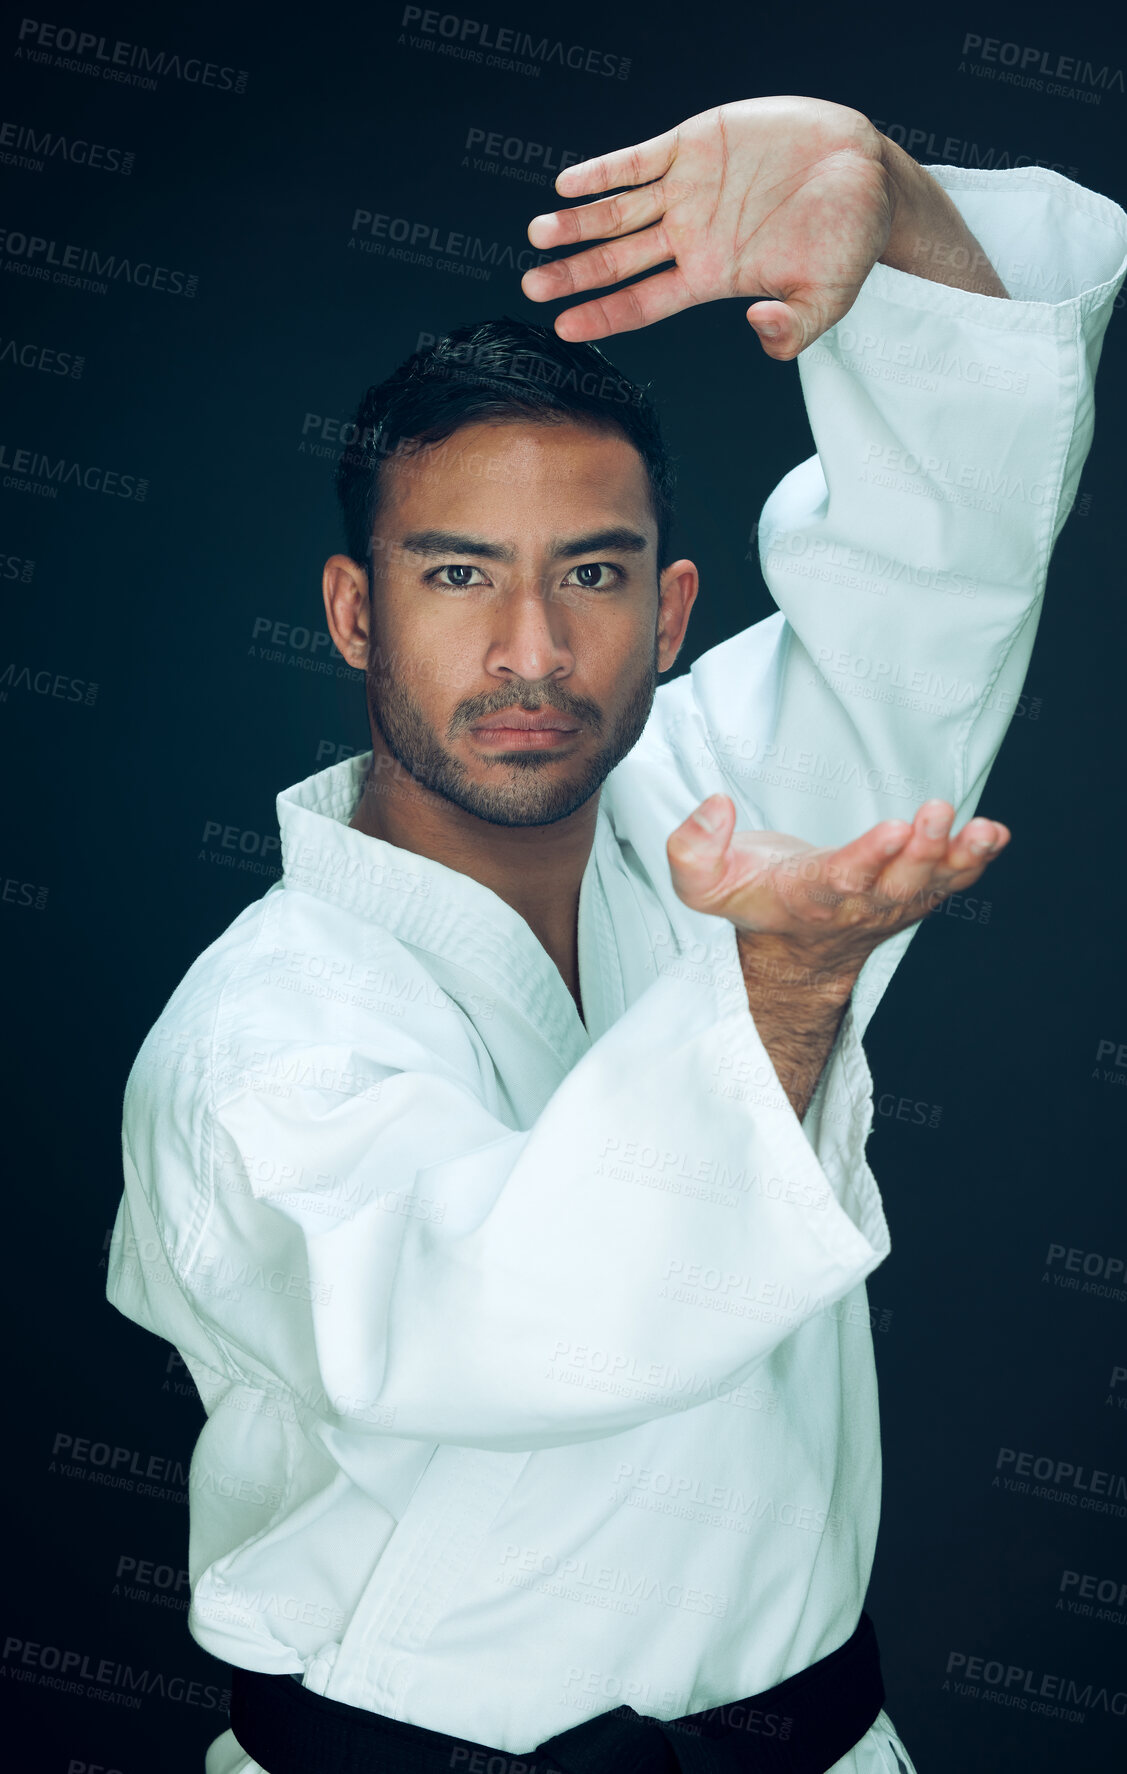 Buy stock photo Cropped portrait of a handsome young male martial artist practicing karate in studio against a dark background